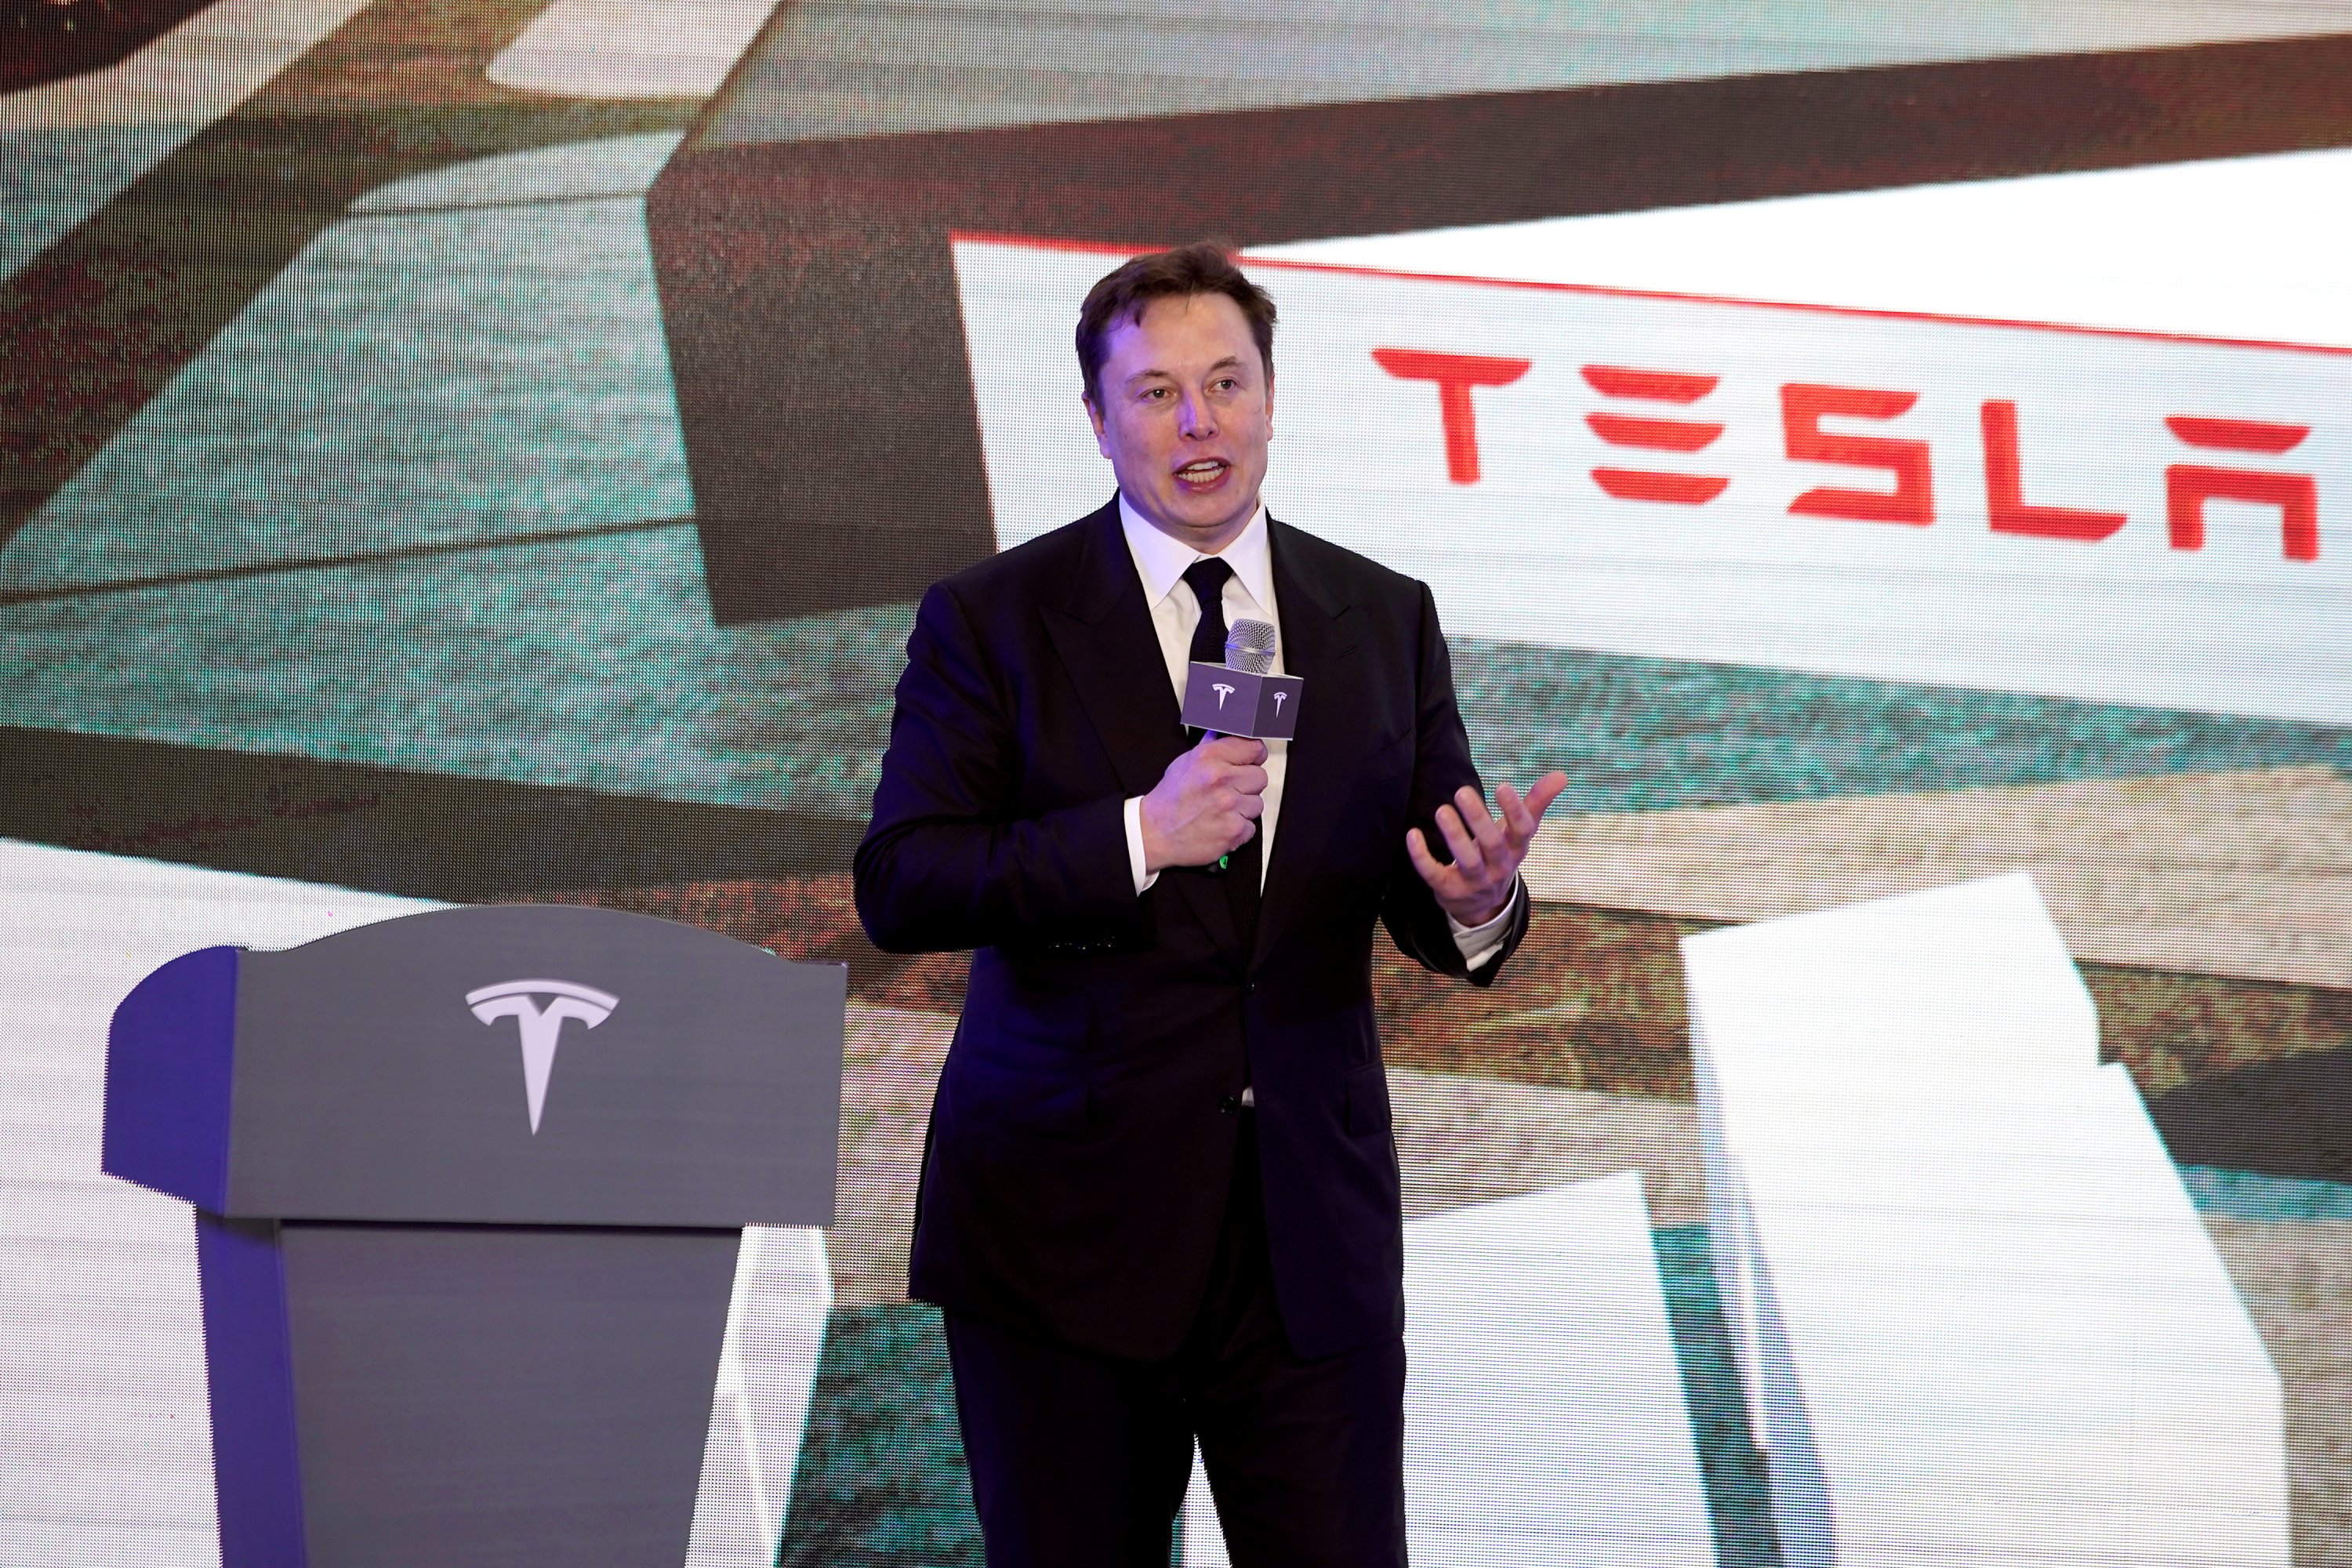 Tesla stocks tumble 12% after Musk tweets price is 'too high' thumbnail